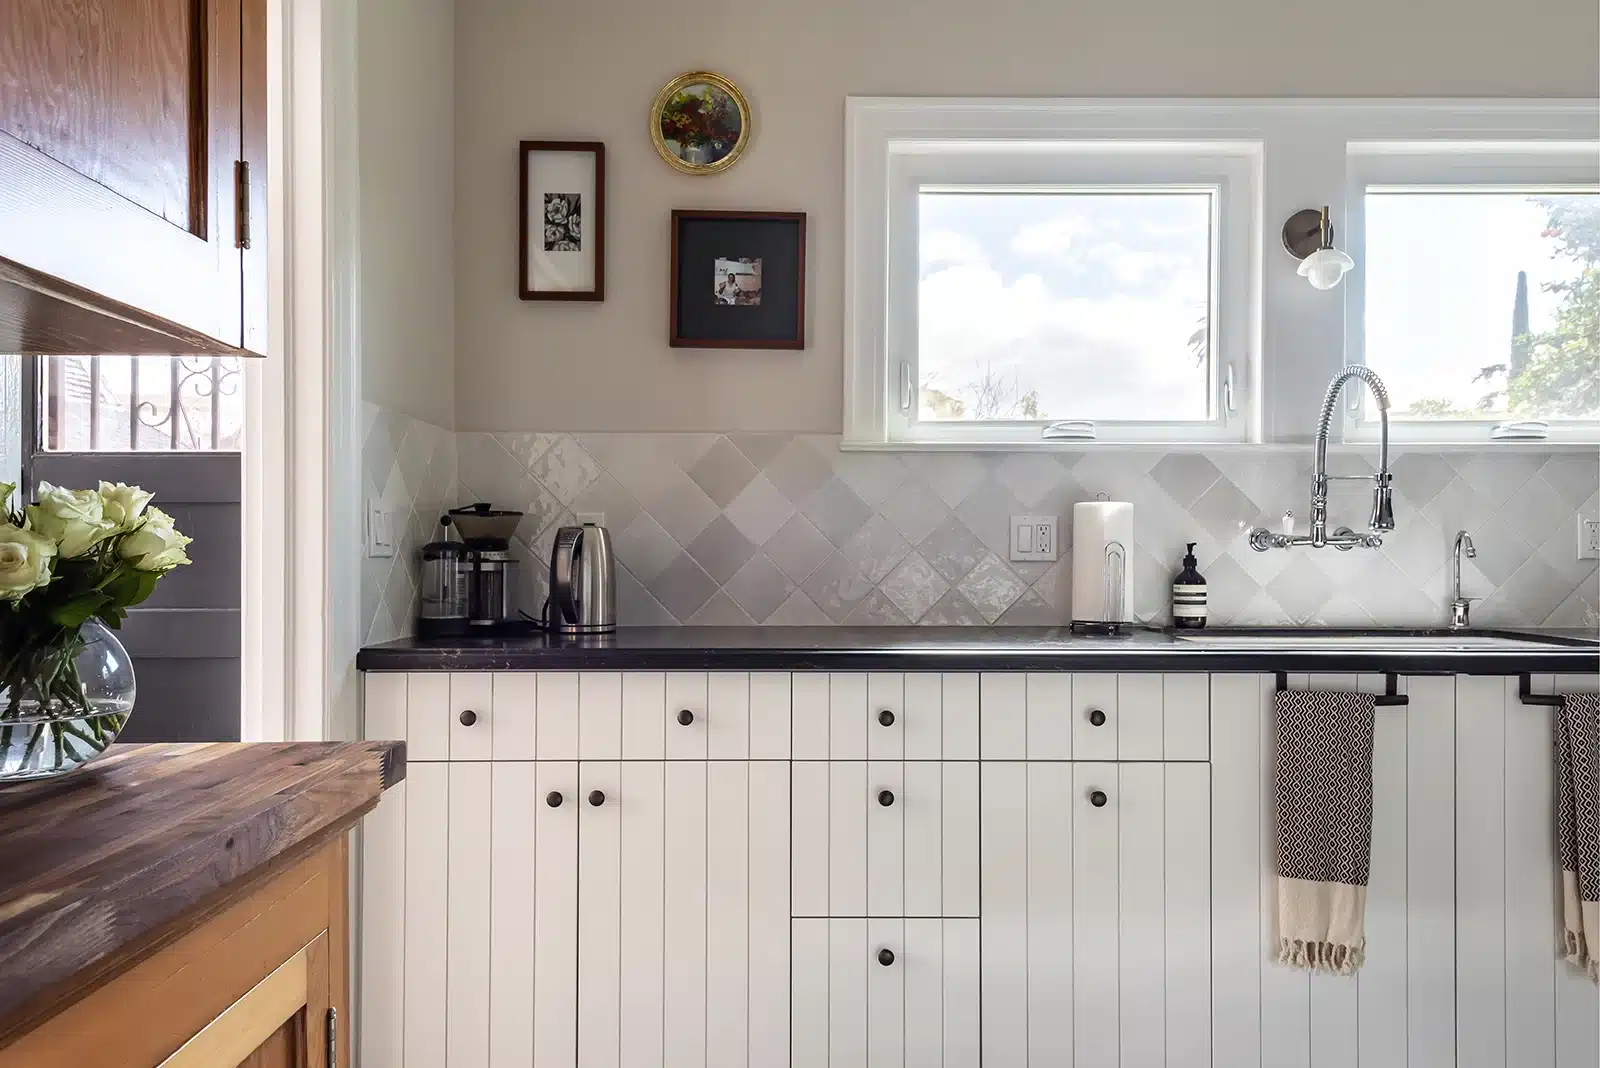 white beadboard cabinet doors with black hardware and countertop in kitchen remodel